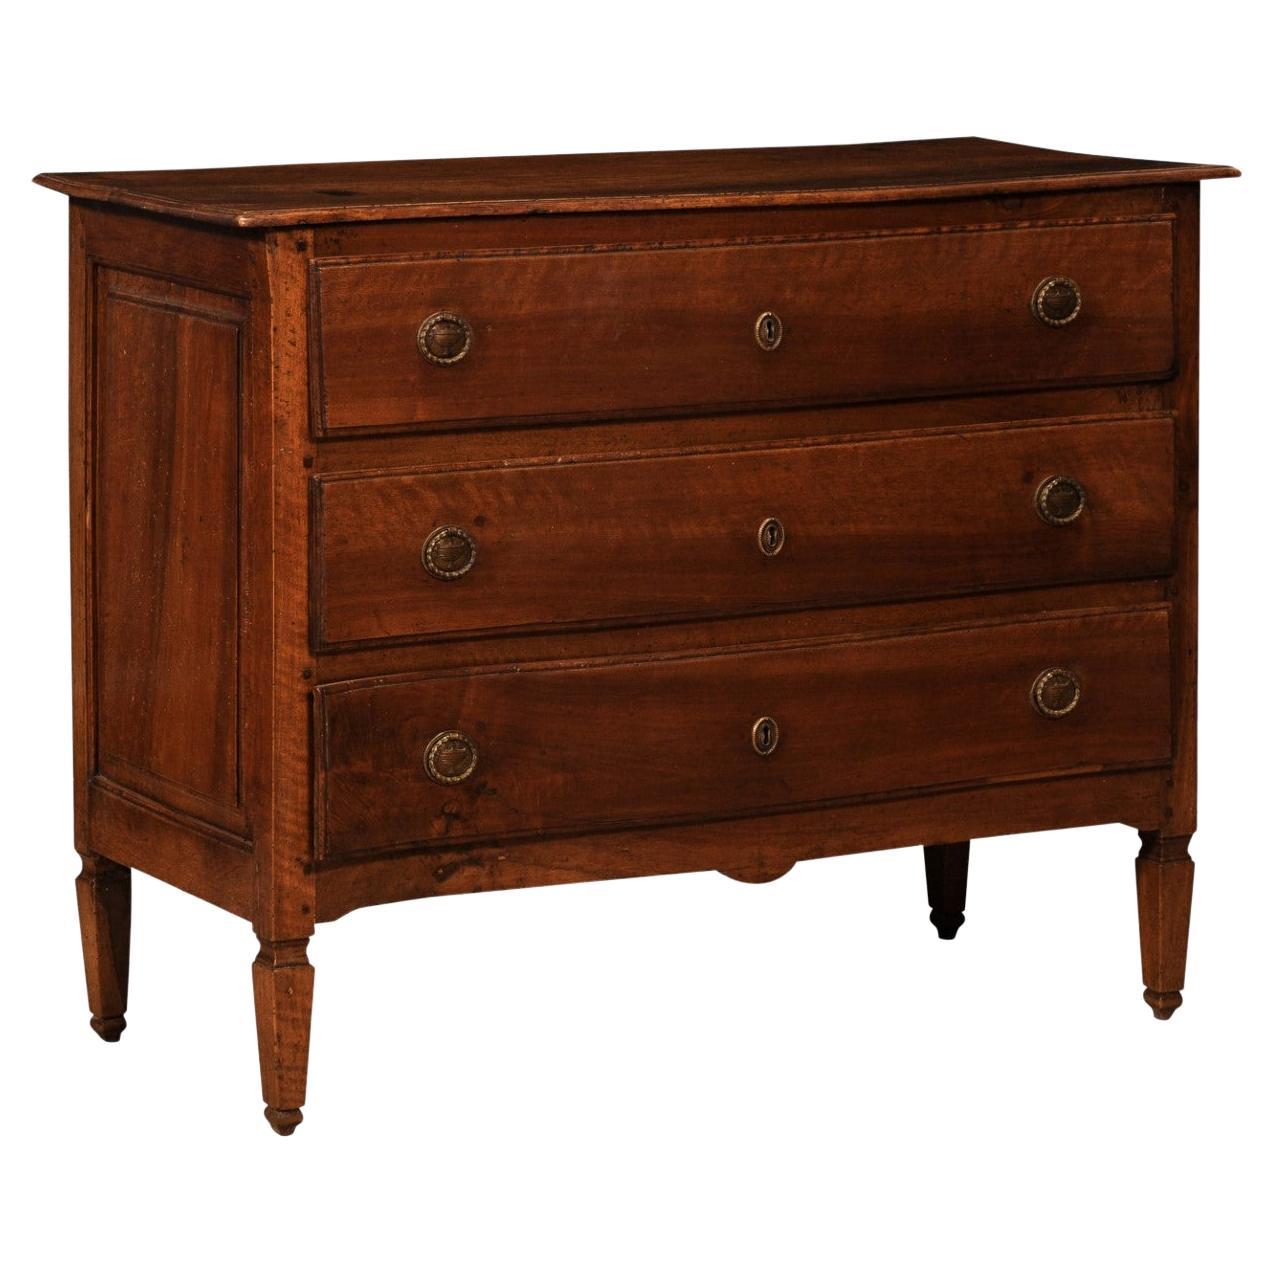 Italian 1820s Serpentine Front Walnut Commode with Three Drawers For Sale